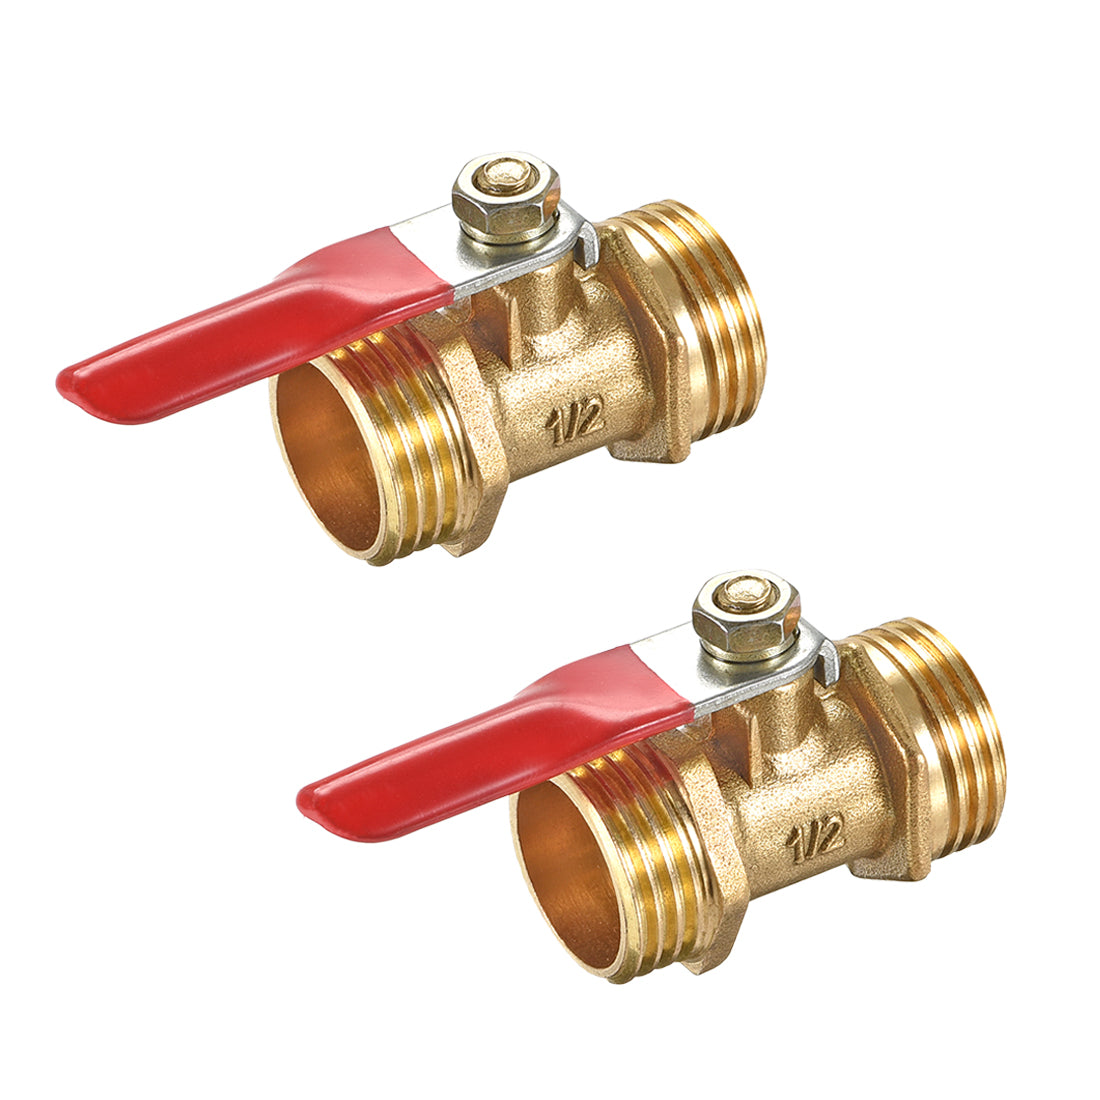 Uxcell Uxcell Brass Air Ball Valve Shut Off Switch G1/2 Male to Male Pipe Coupler 2Pcs